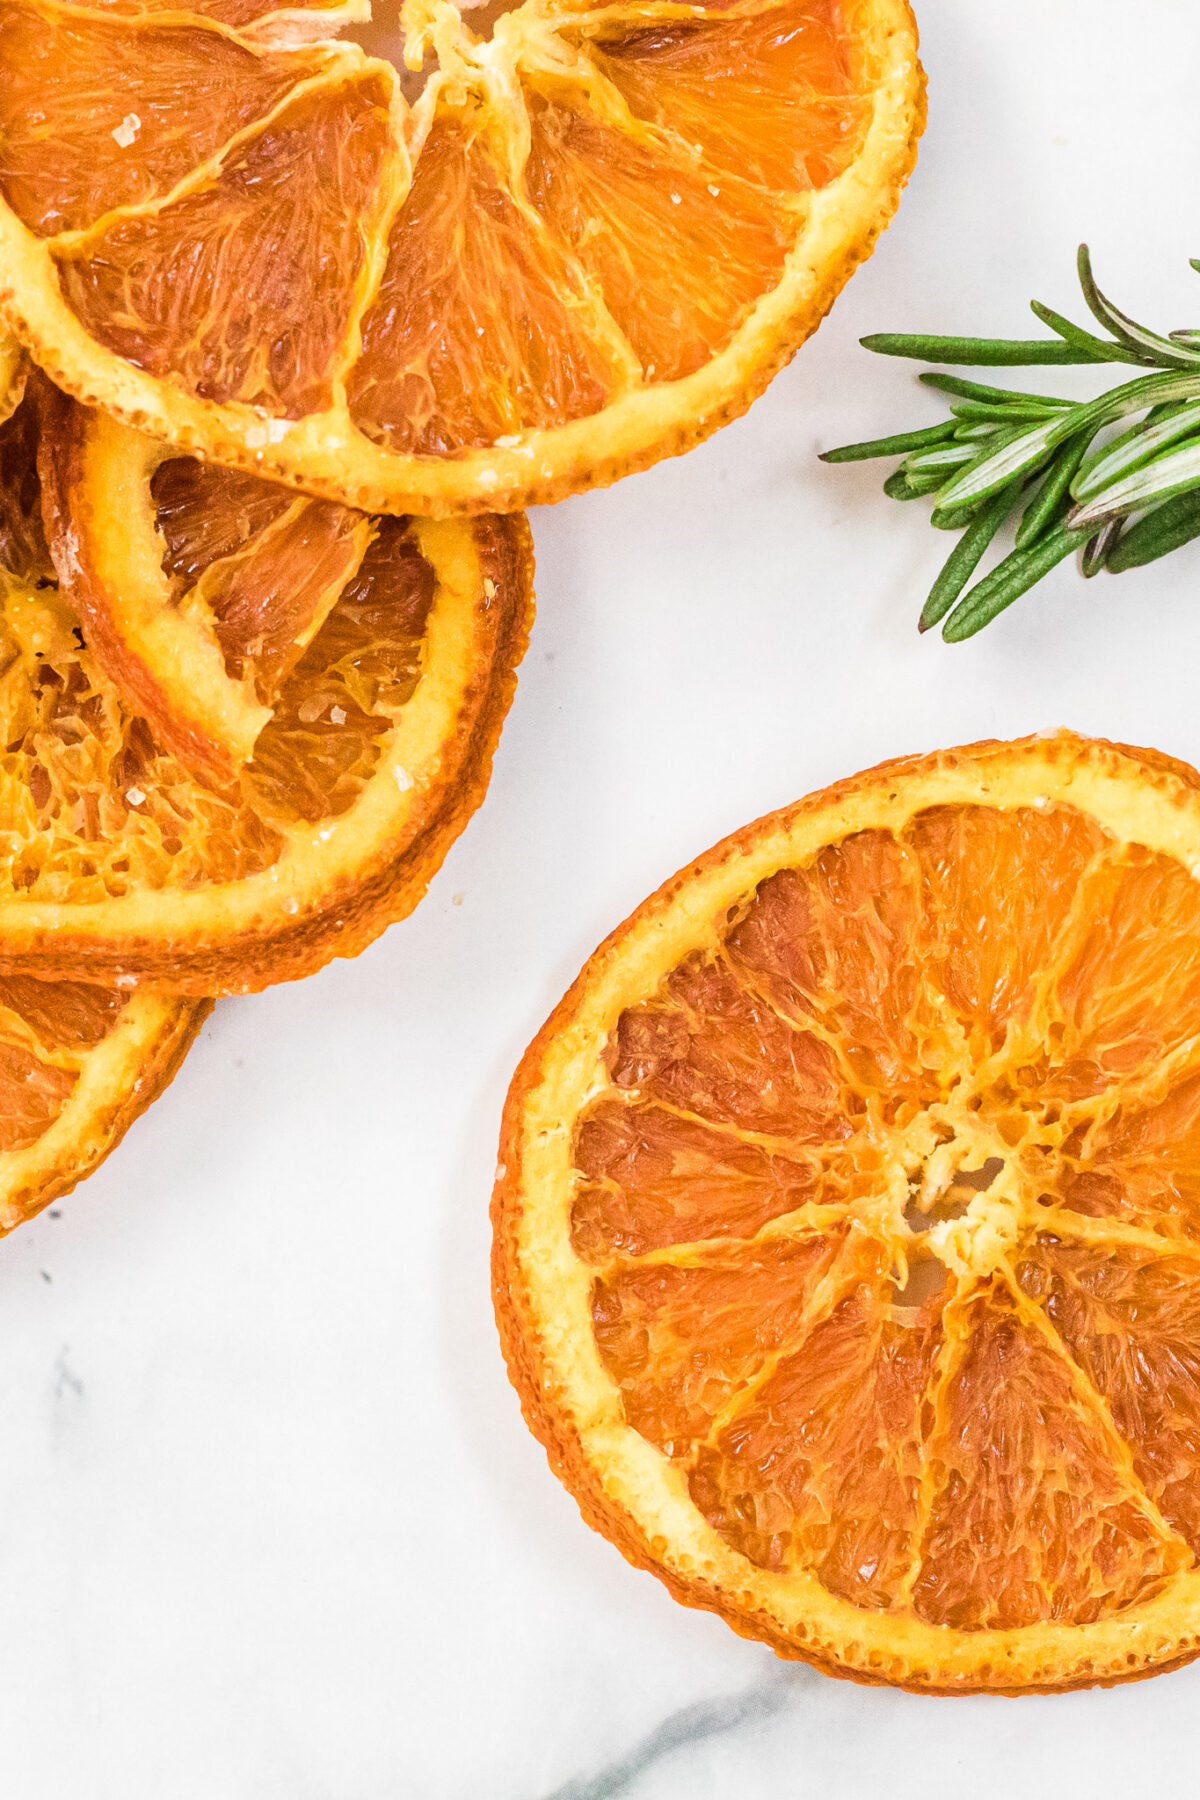 An excellent way to preserve oranges, dried orange slices can be used for craft projects, drink garnishes, or snacking.